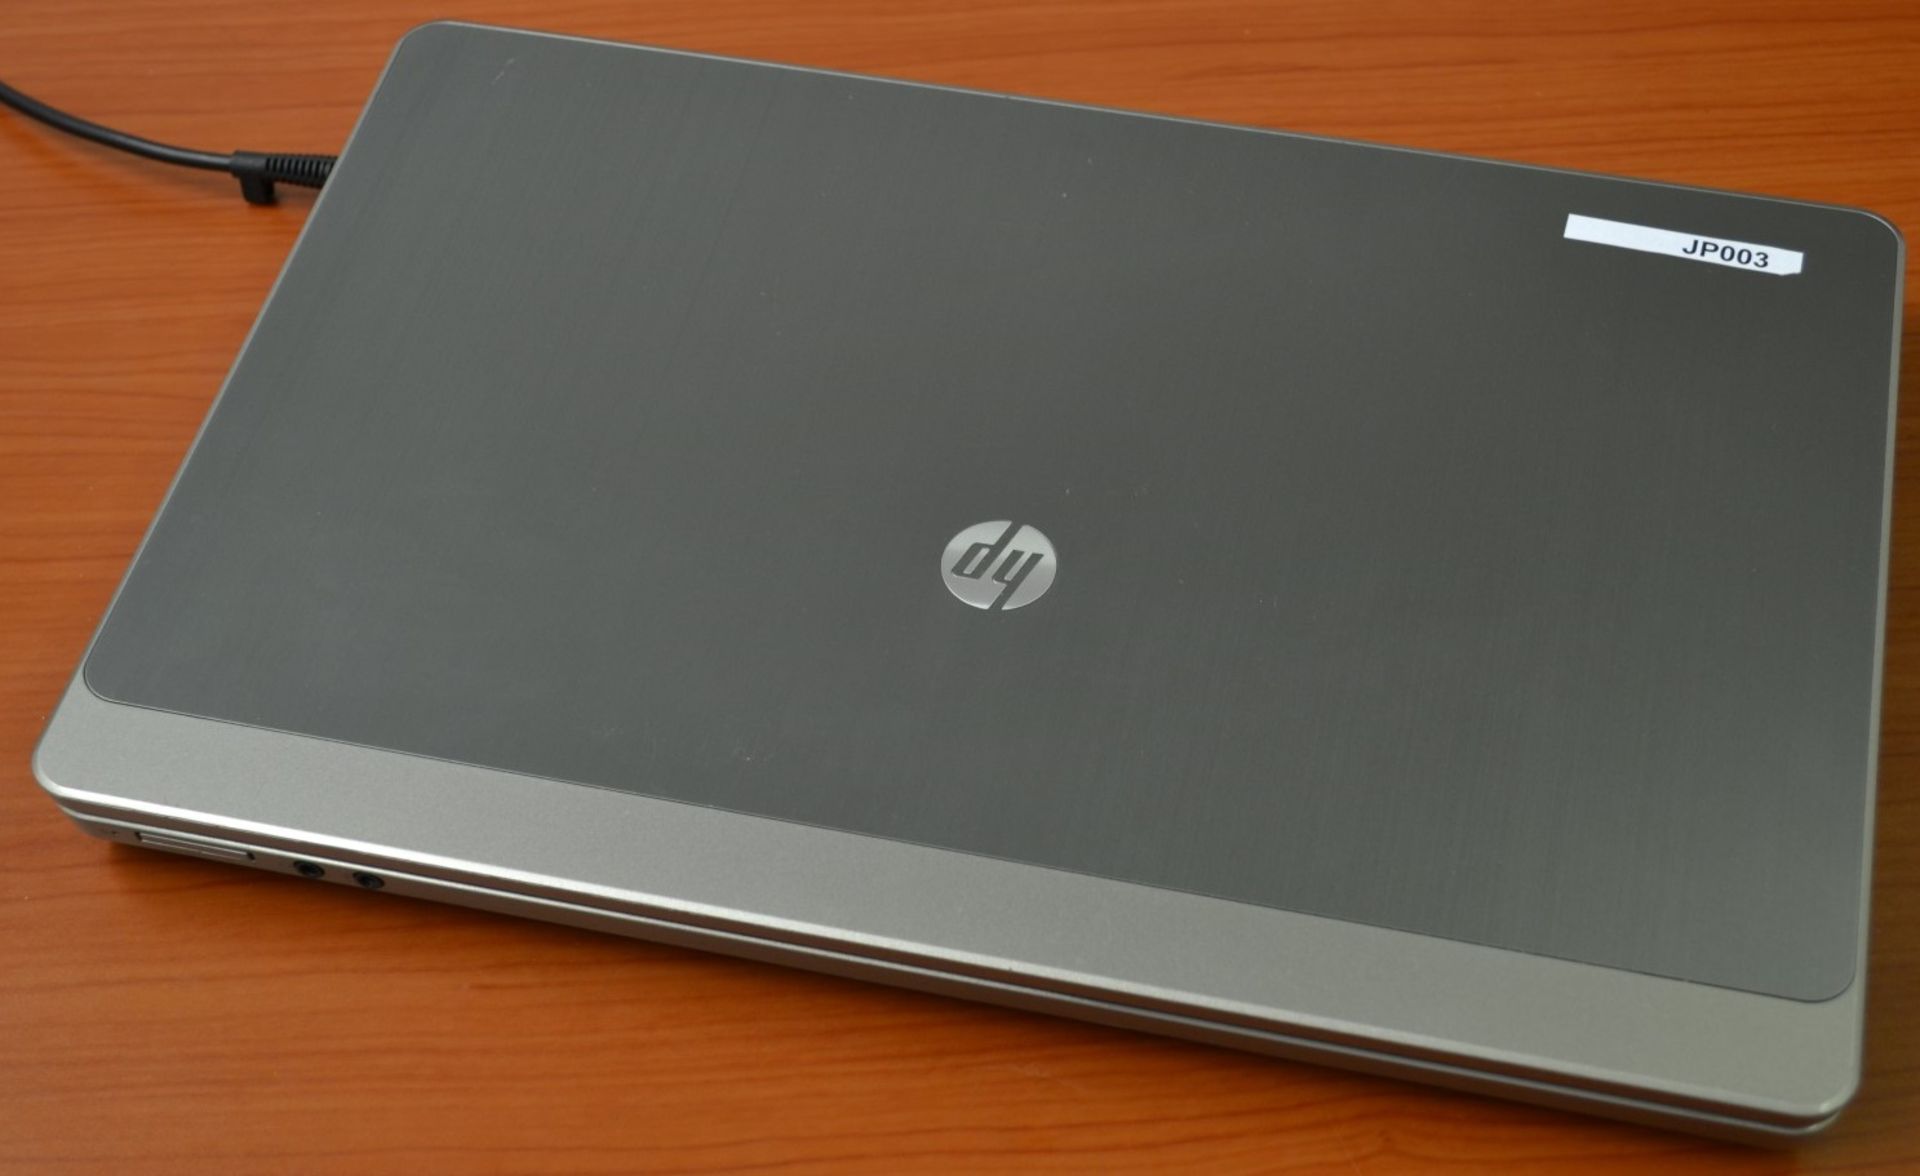 1 x HP Probook 4535s Laptop Computer - 15.6 Inch Screen Size - Features  AMD A4-3305M Dual Core - Image 5 of 6